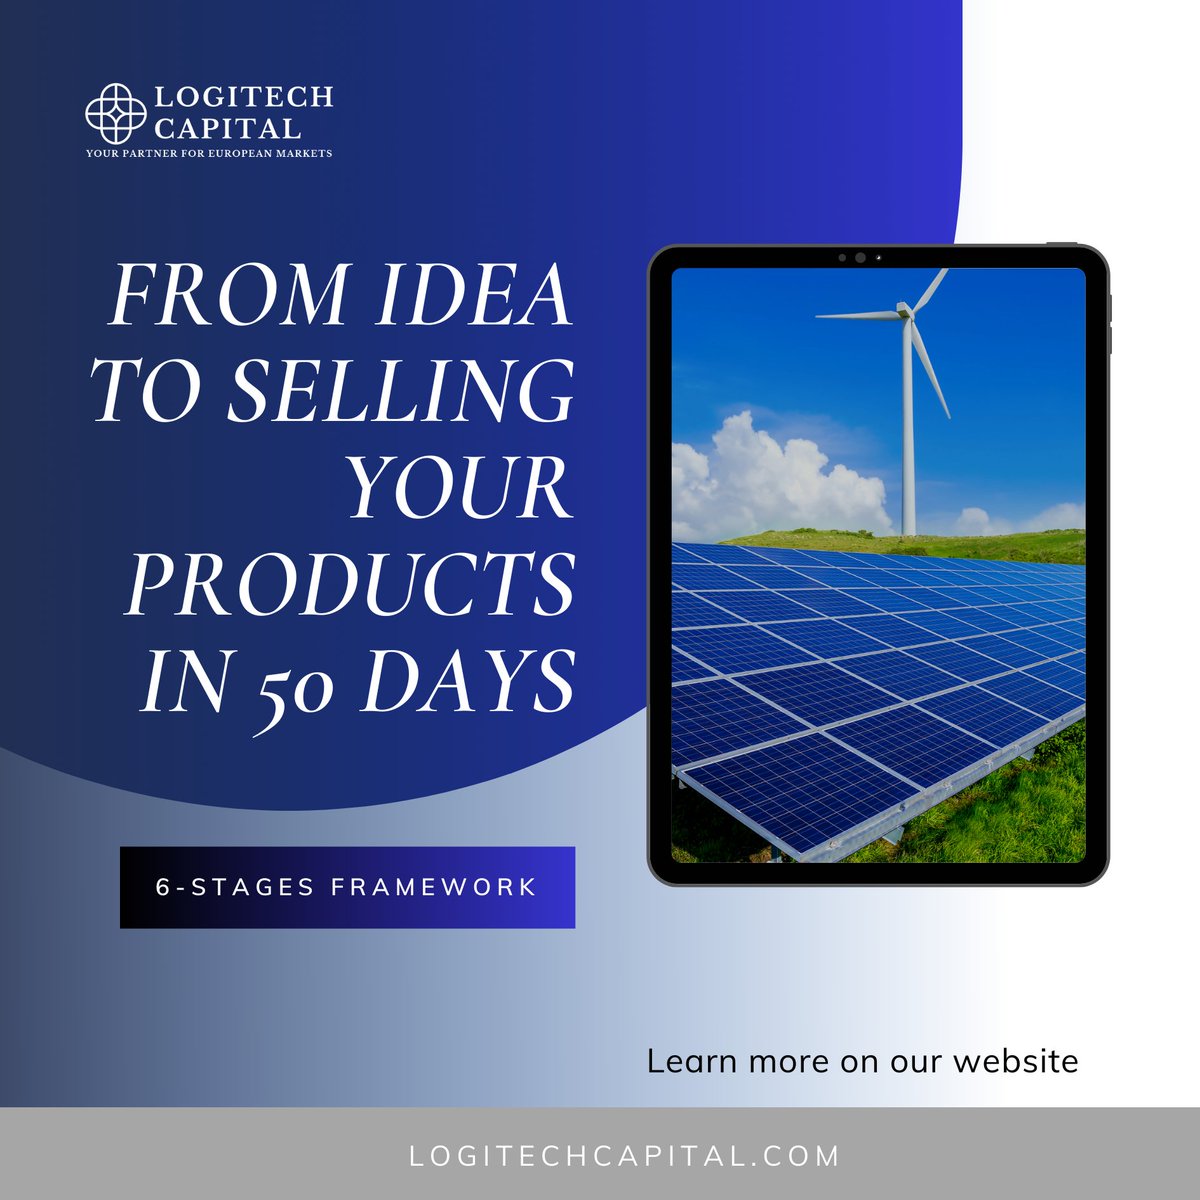 Wondering how you can sell your products in Europe in 2 months? Reach out to us!
#retailecommerce #sustainabletechnology #technologynews #chinatoeurope #israeleurope #uktoeurope #greentech #logitechcapital